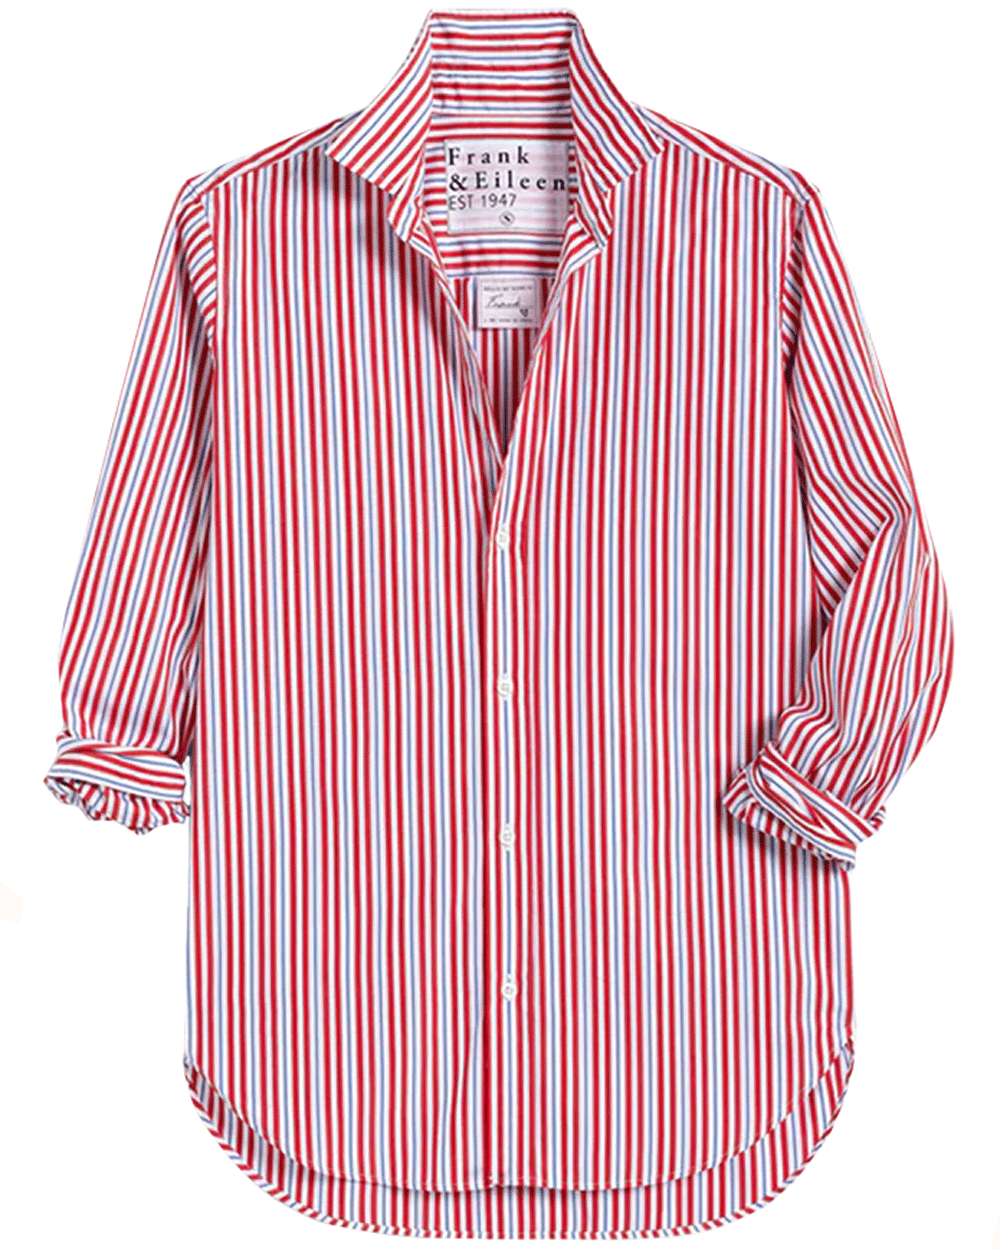 Red and Blue Stripe Frank Button Up Shirt